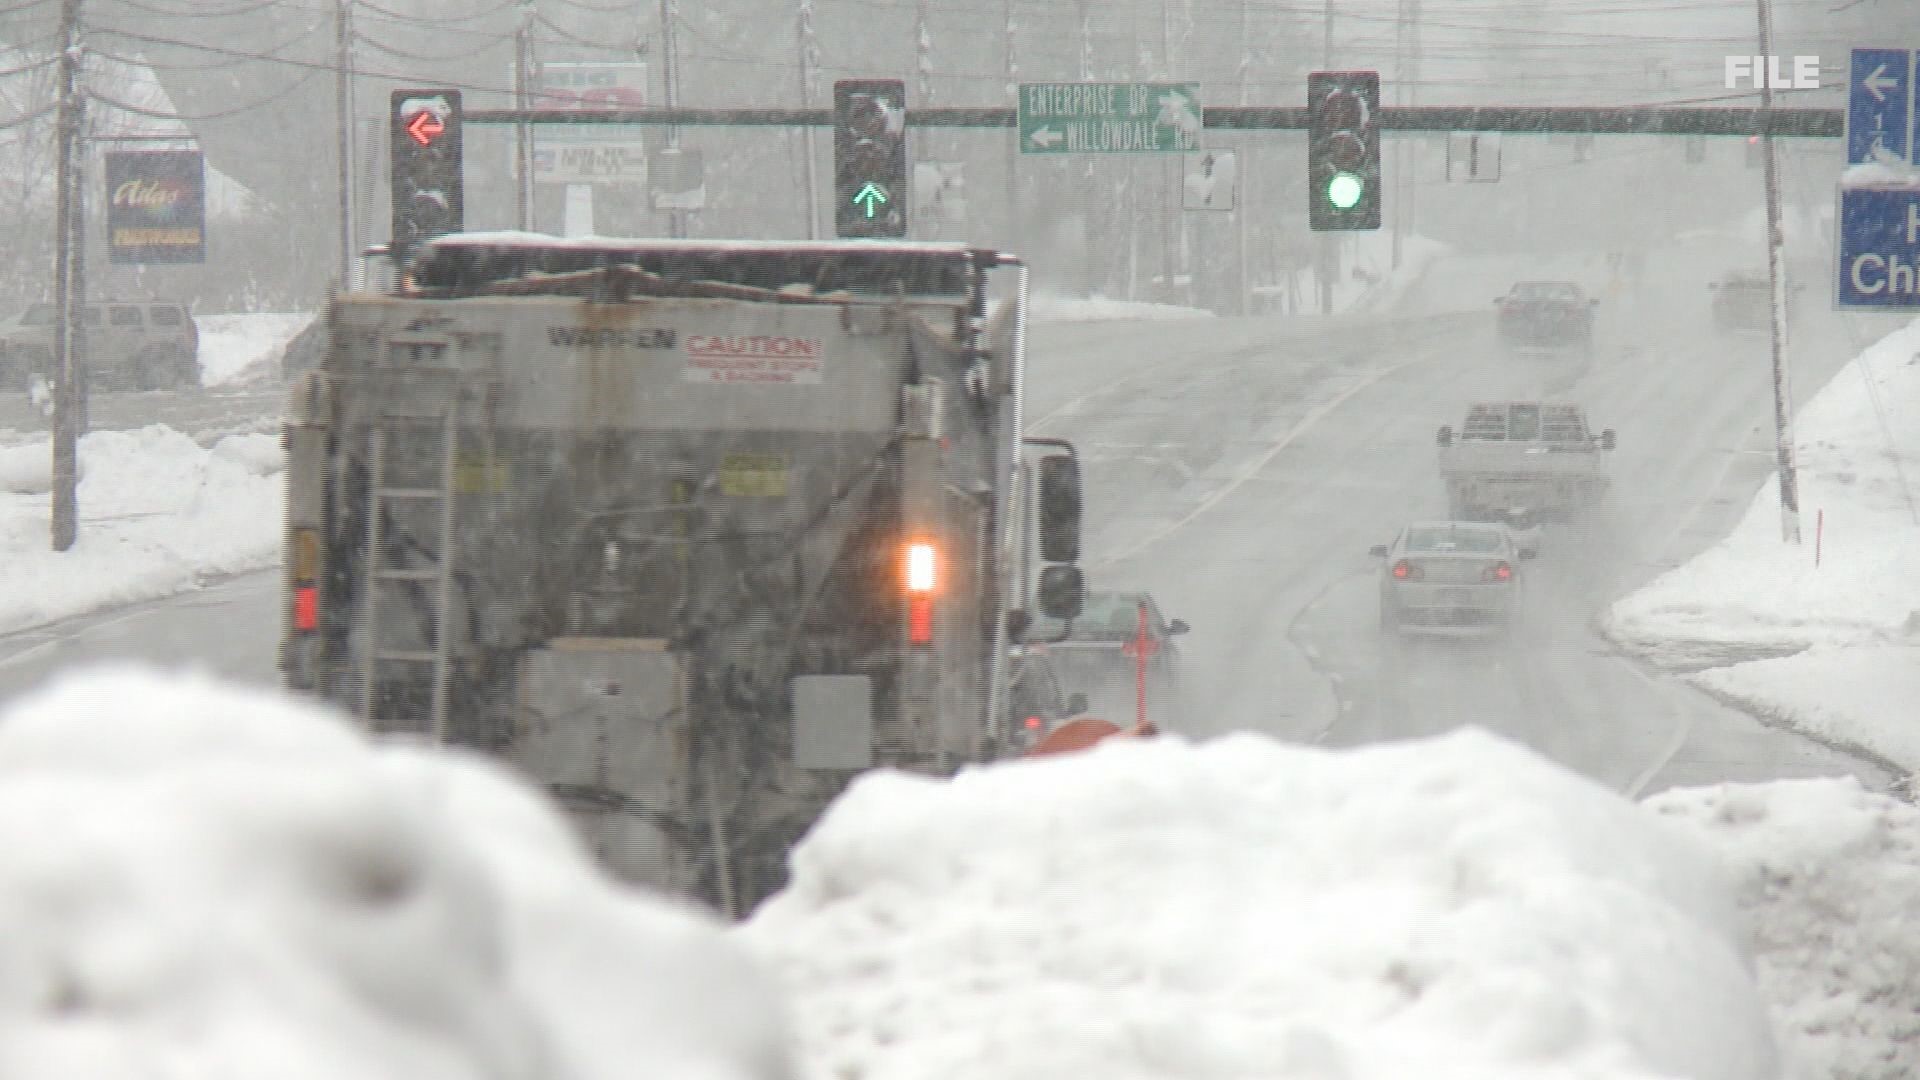 A mid-February snowstorm is nothing new for Mainers as we know just how to prepare.